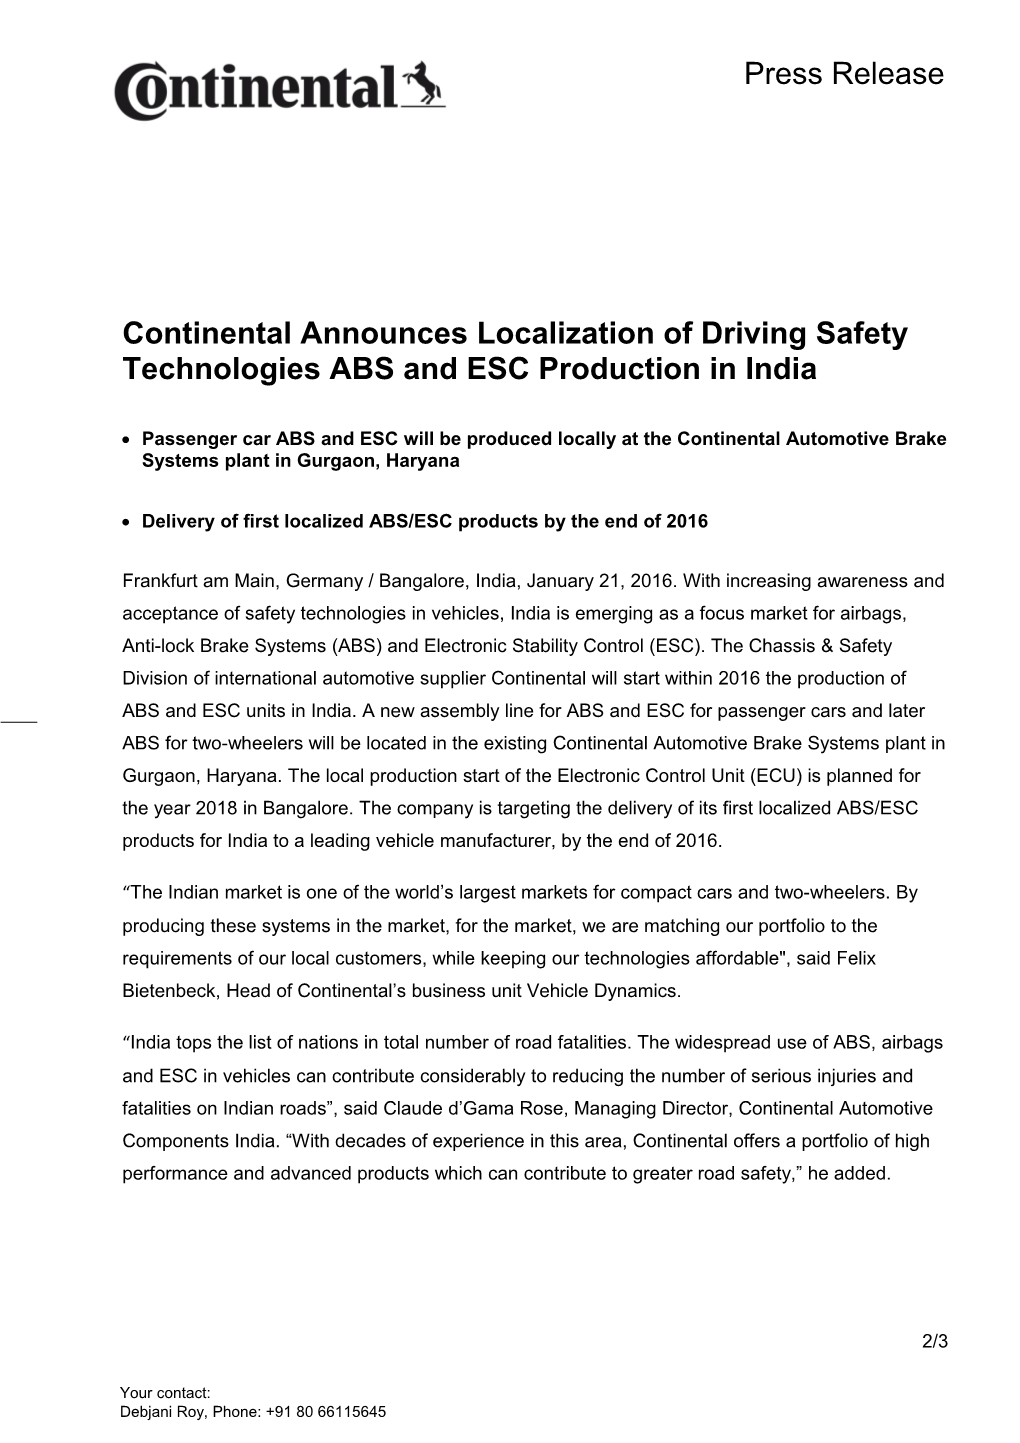 Continental Announces Localization of Driving Safety Technologies ABS and ESC Production